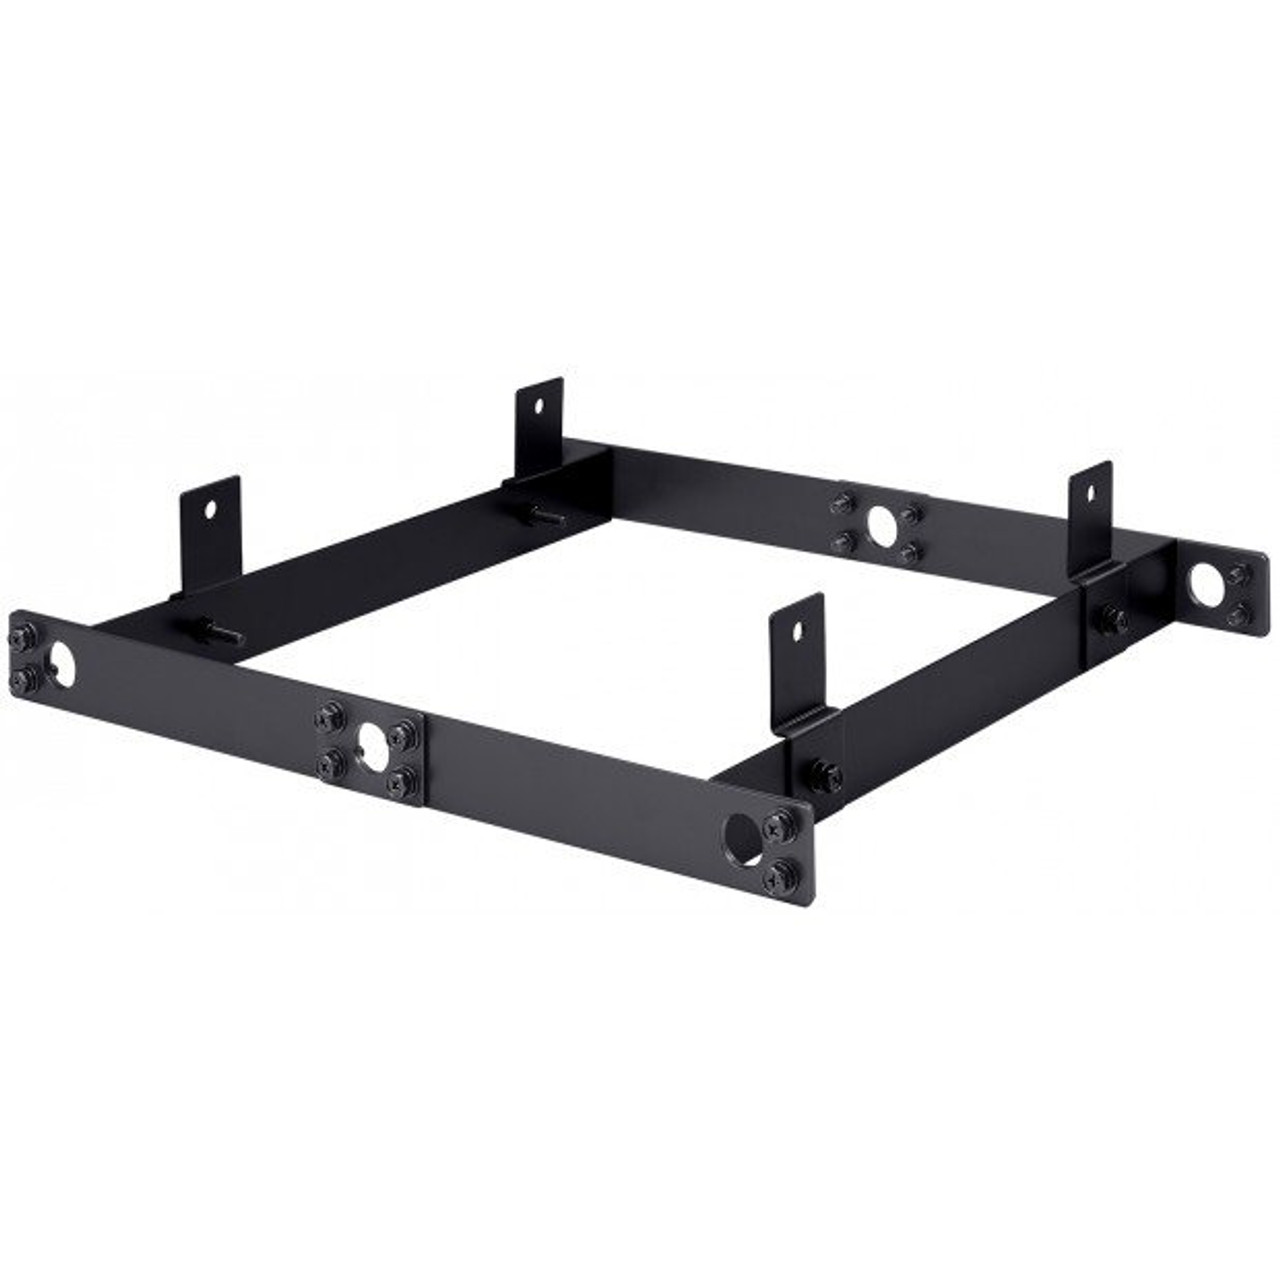 TOA HY-PF1 Rigging Frame For HX-5 Speaker (HY-PF1)